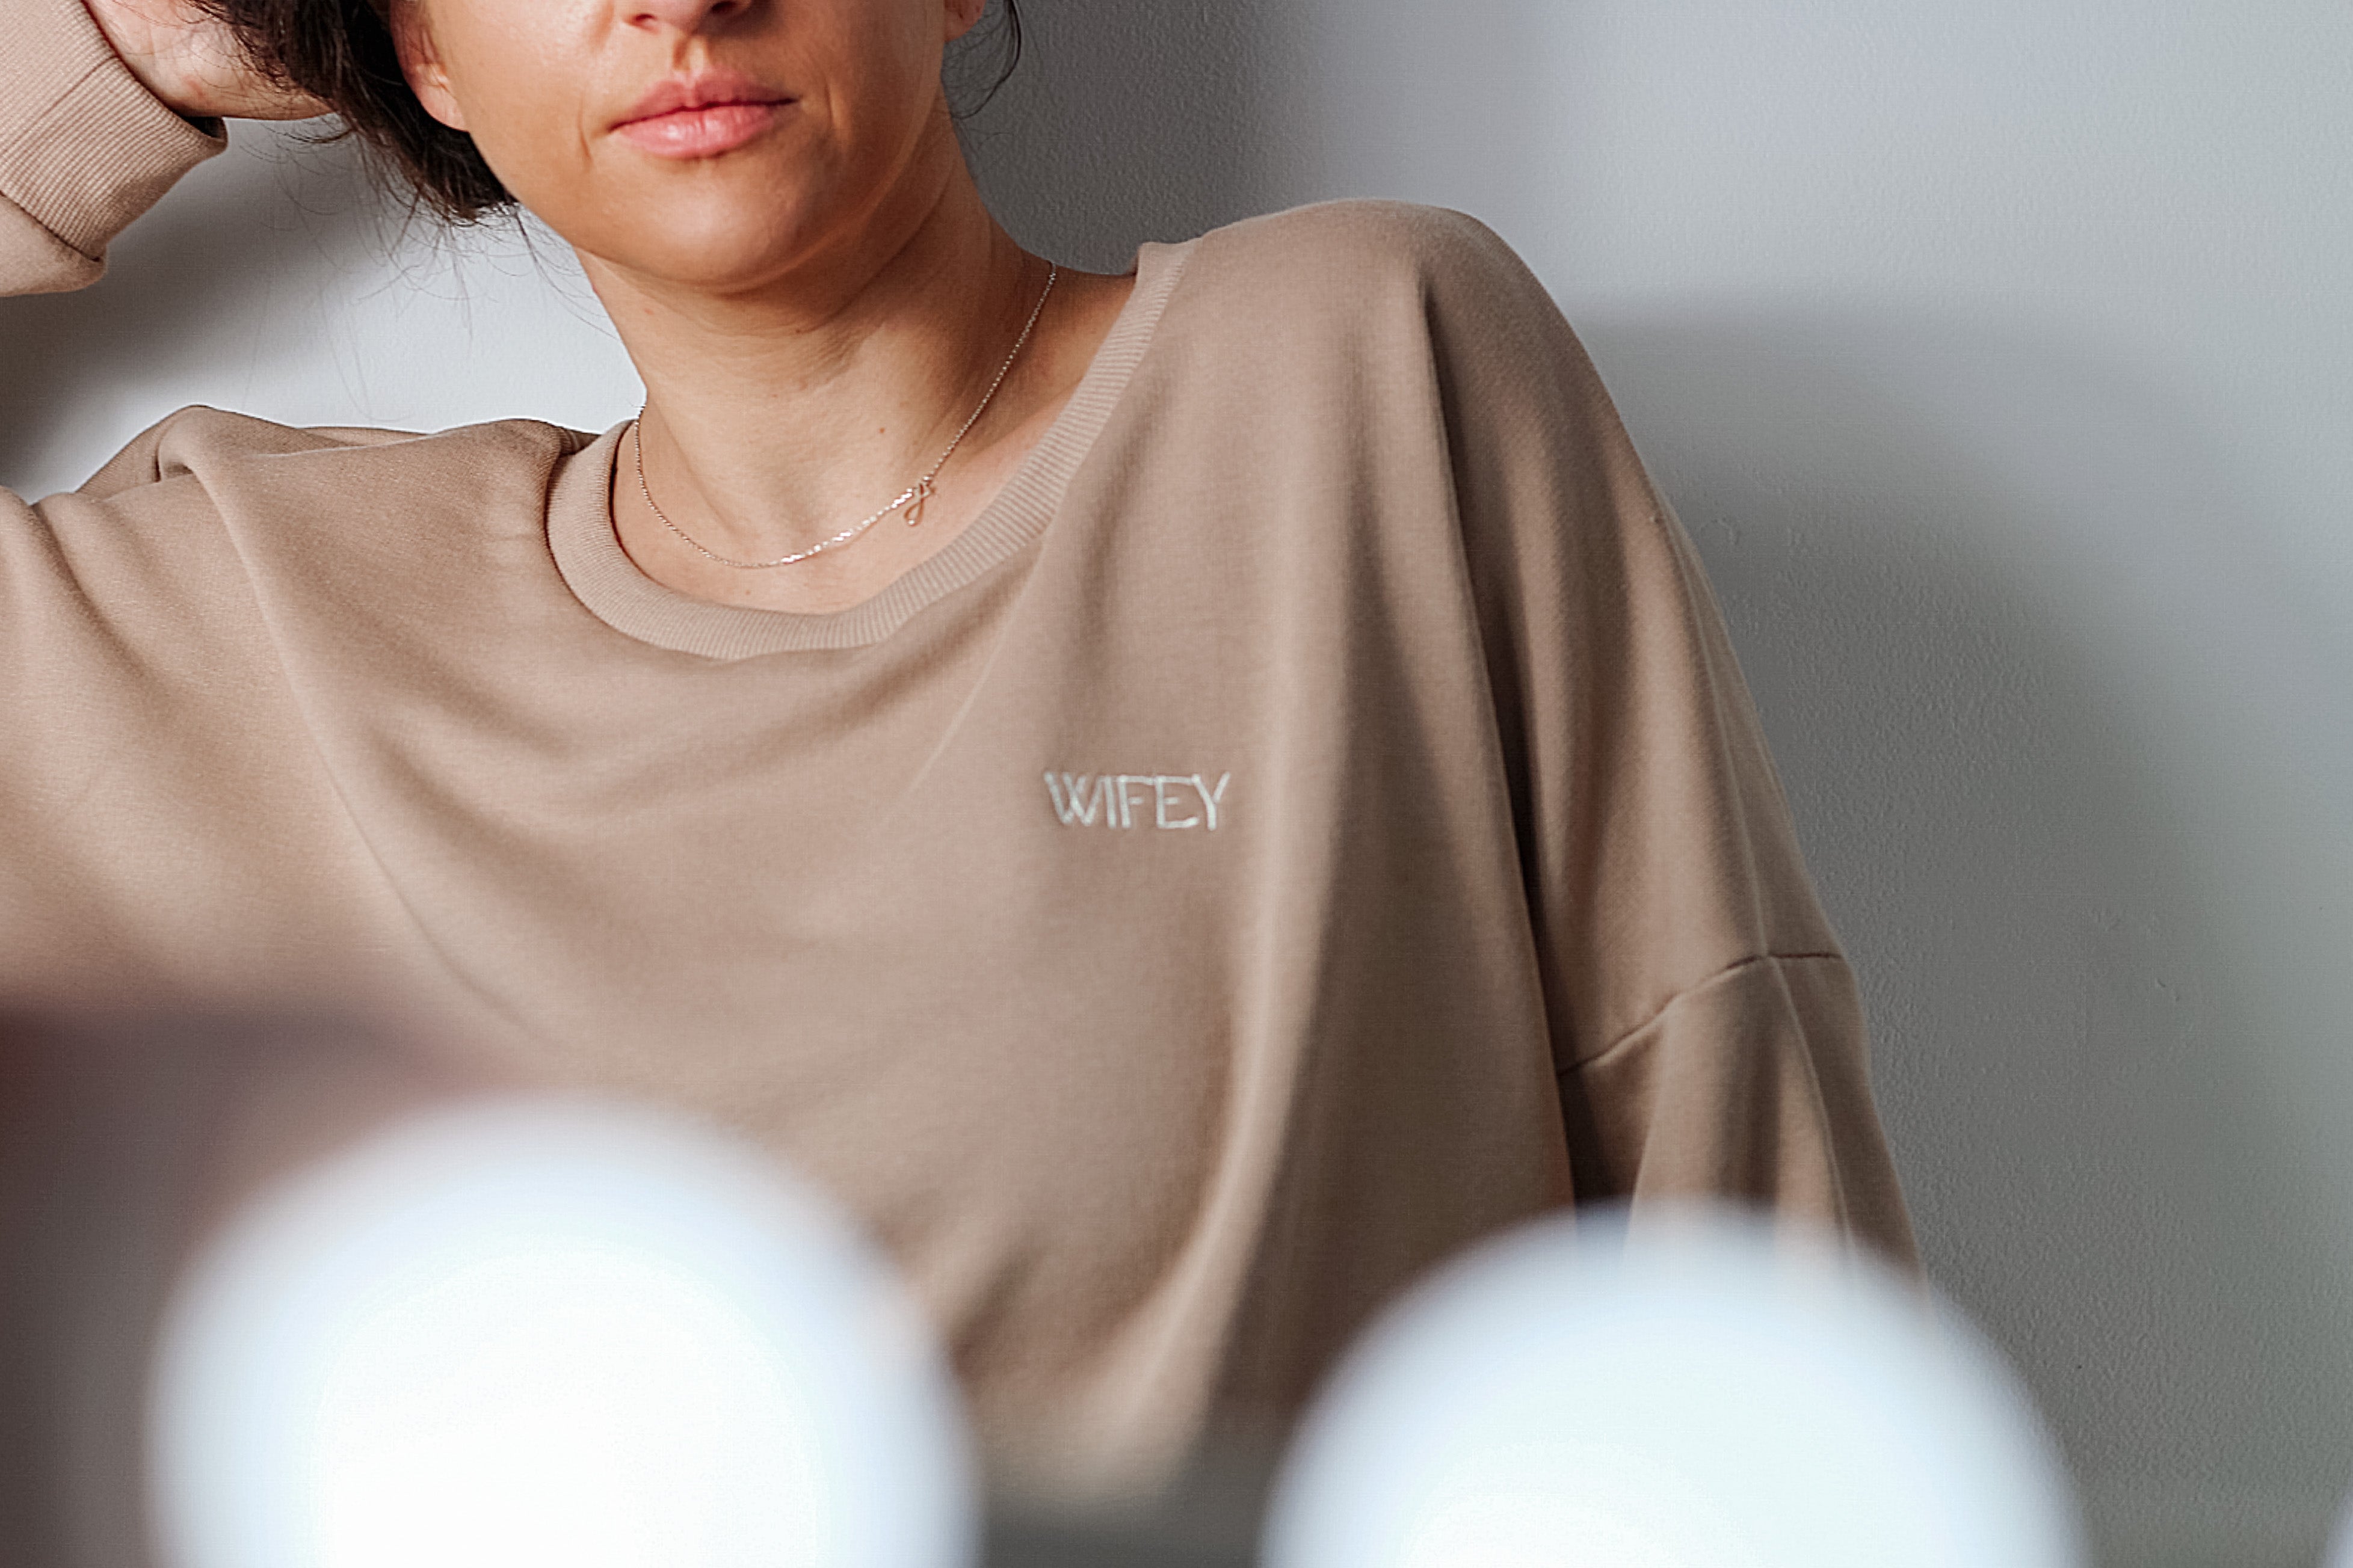 WIFEY embroidered Jumper